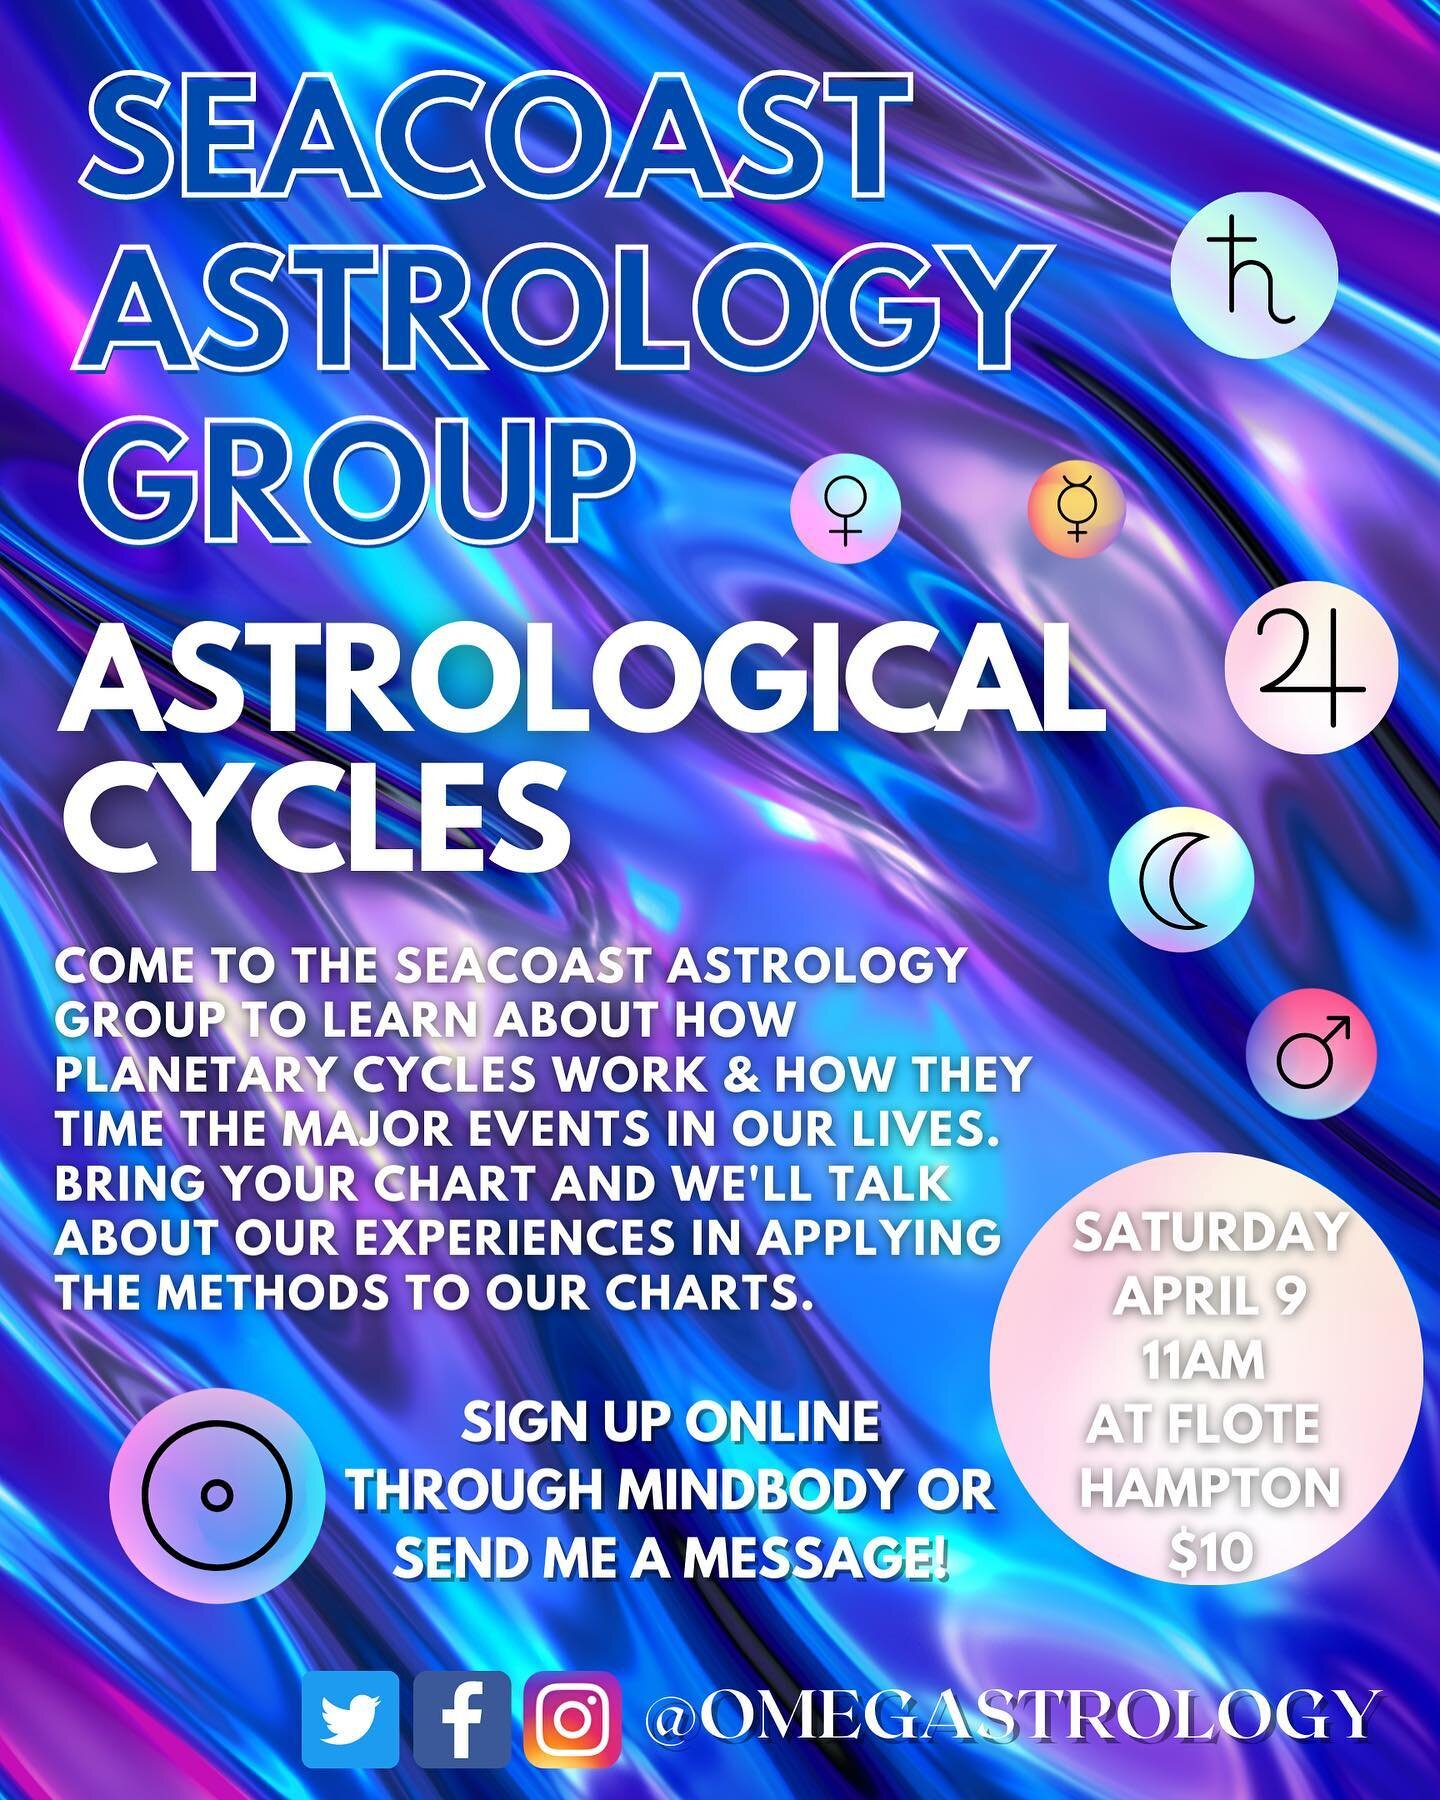 🌔SEACOST ASTROLOGY GROUP🌖

Next meeting coming up on Saturday April 9 at 11AM at Flote in Hampton!
&bull;&bull;&bull;
Come join in for an introduction and discussion on various methods of basic timing technique in astrology, and how to interpret th